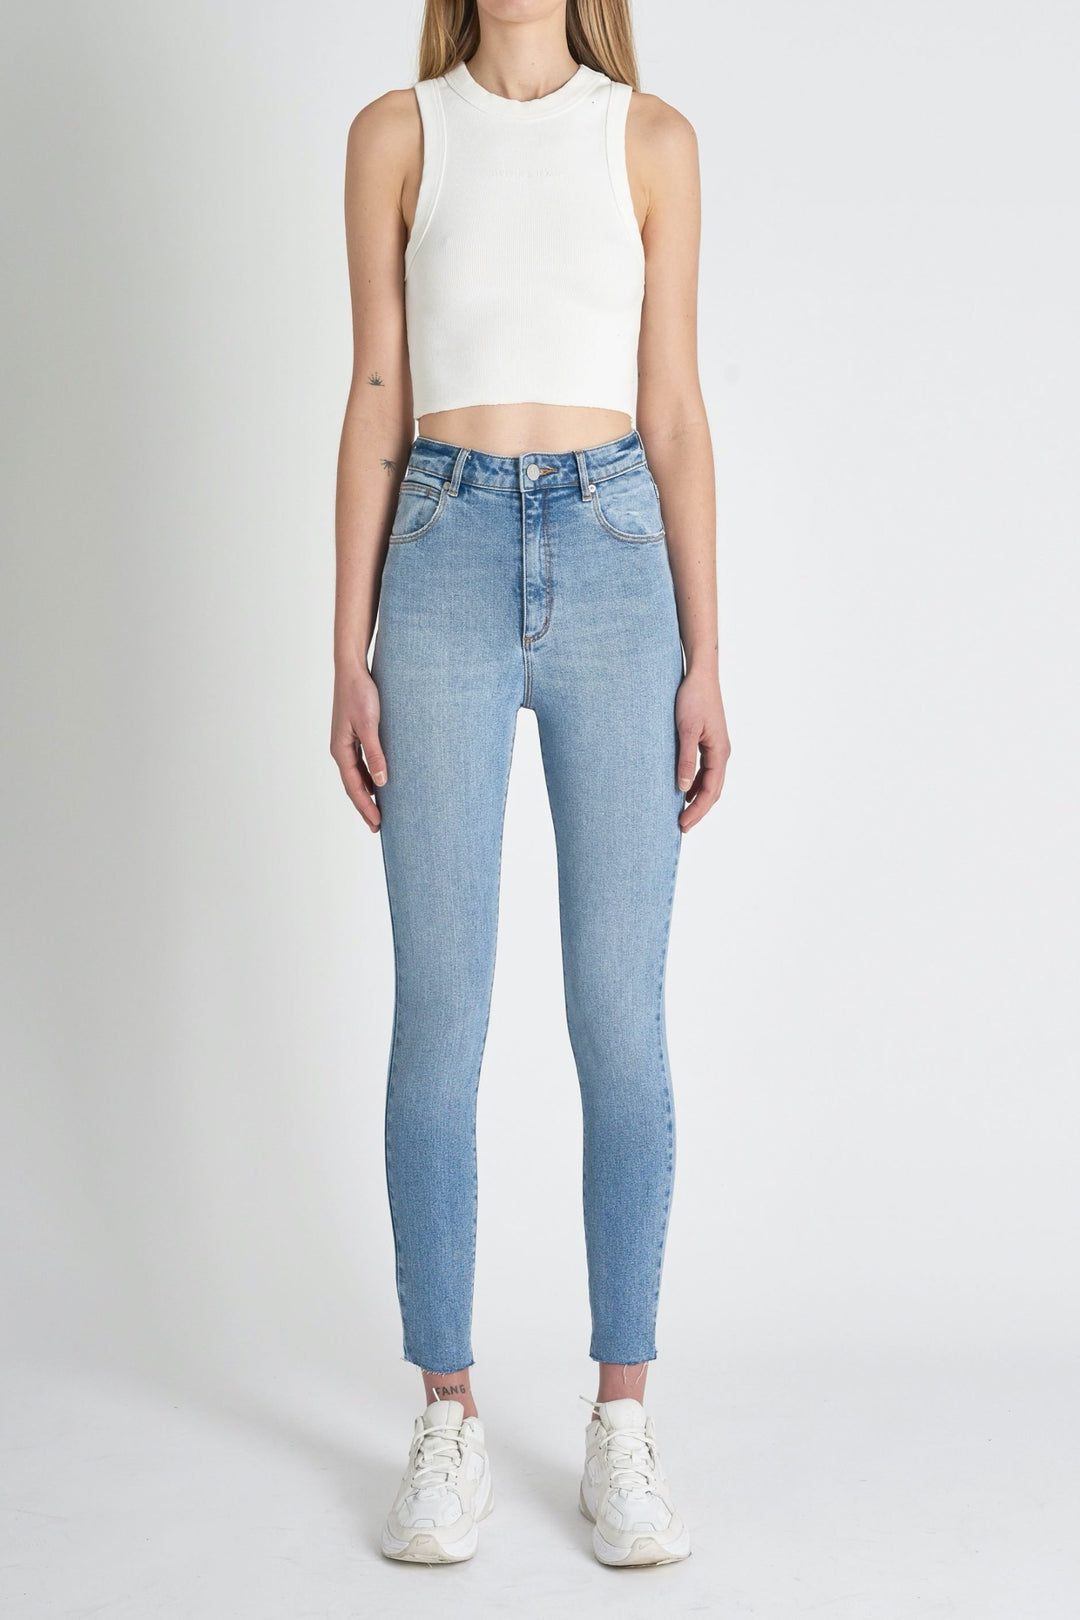 Abrand A High Skinny Ankle Basher Jean - Ashley